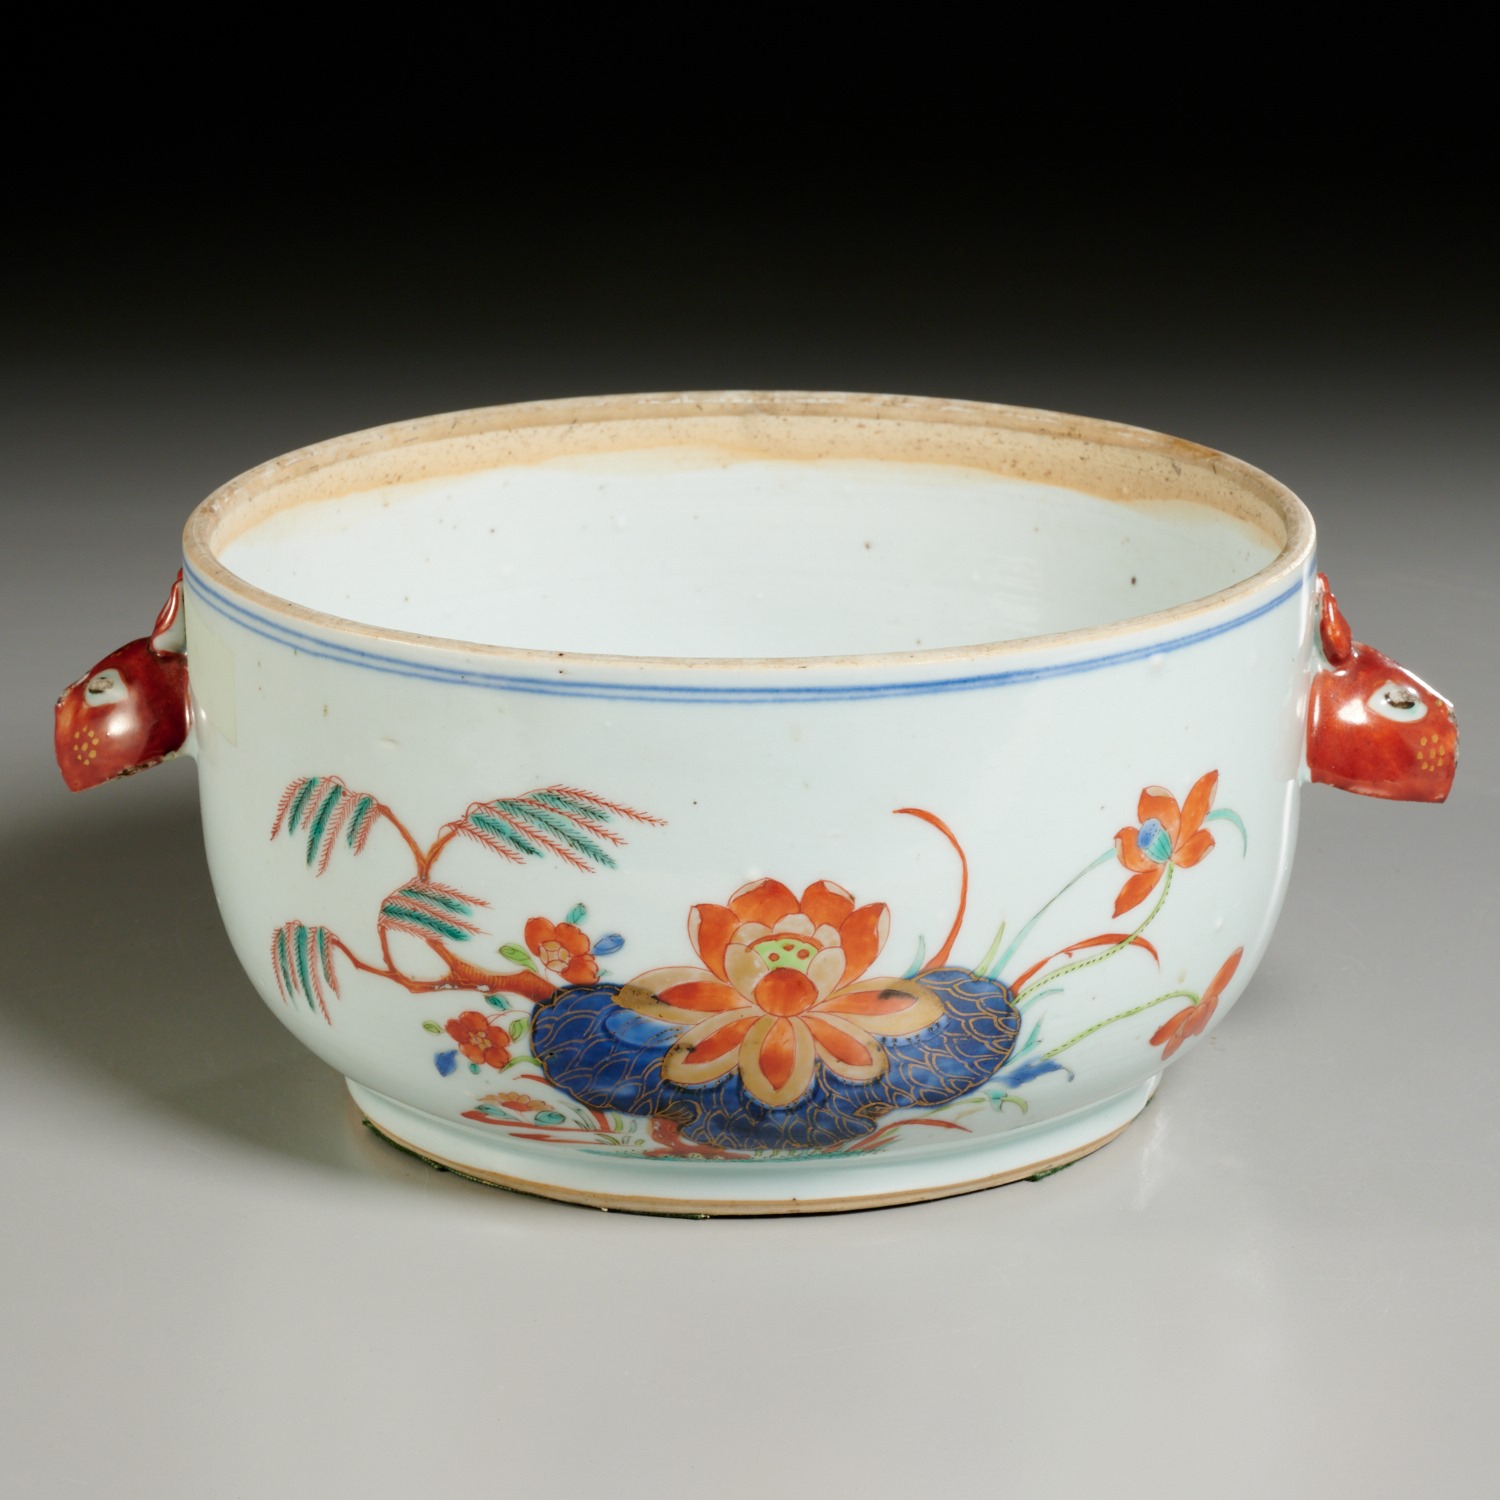 CHINESE EXPORT PORCELAIN BOWL Qing